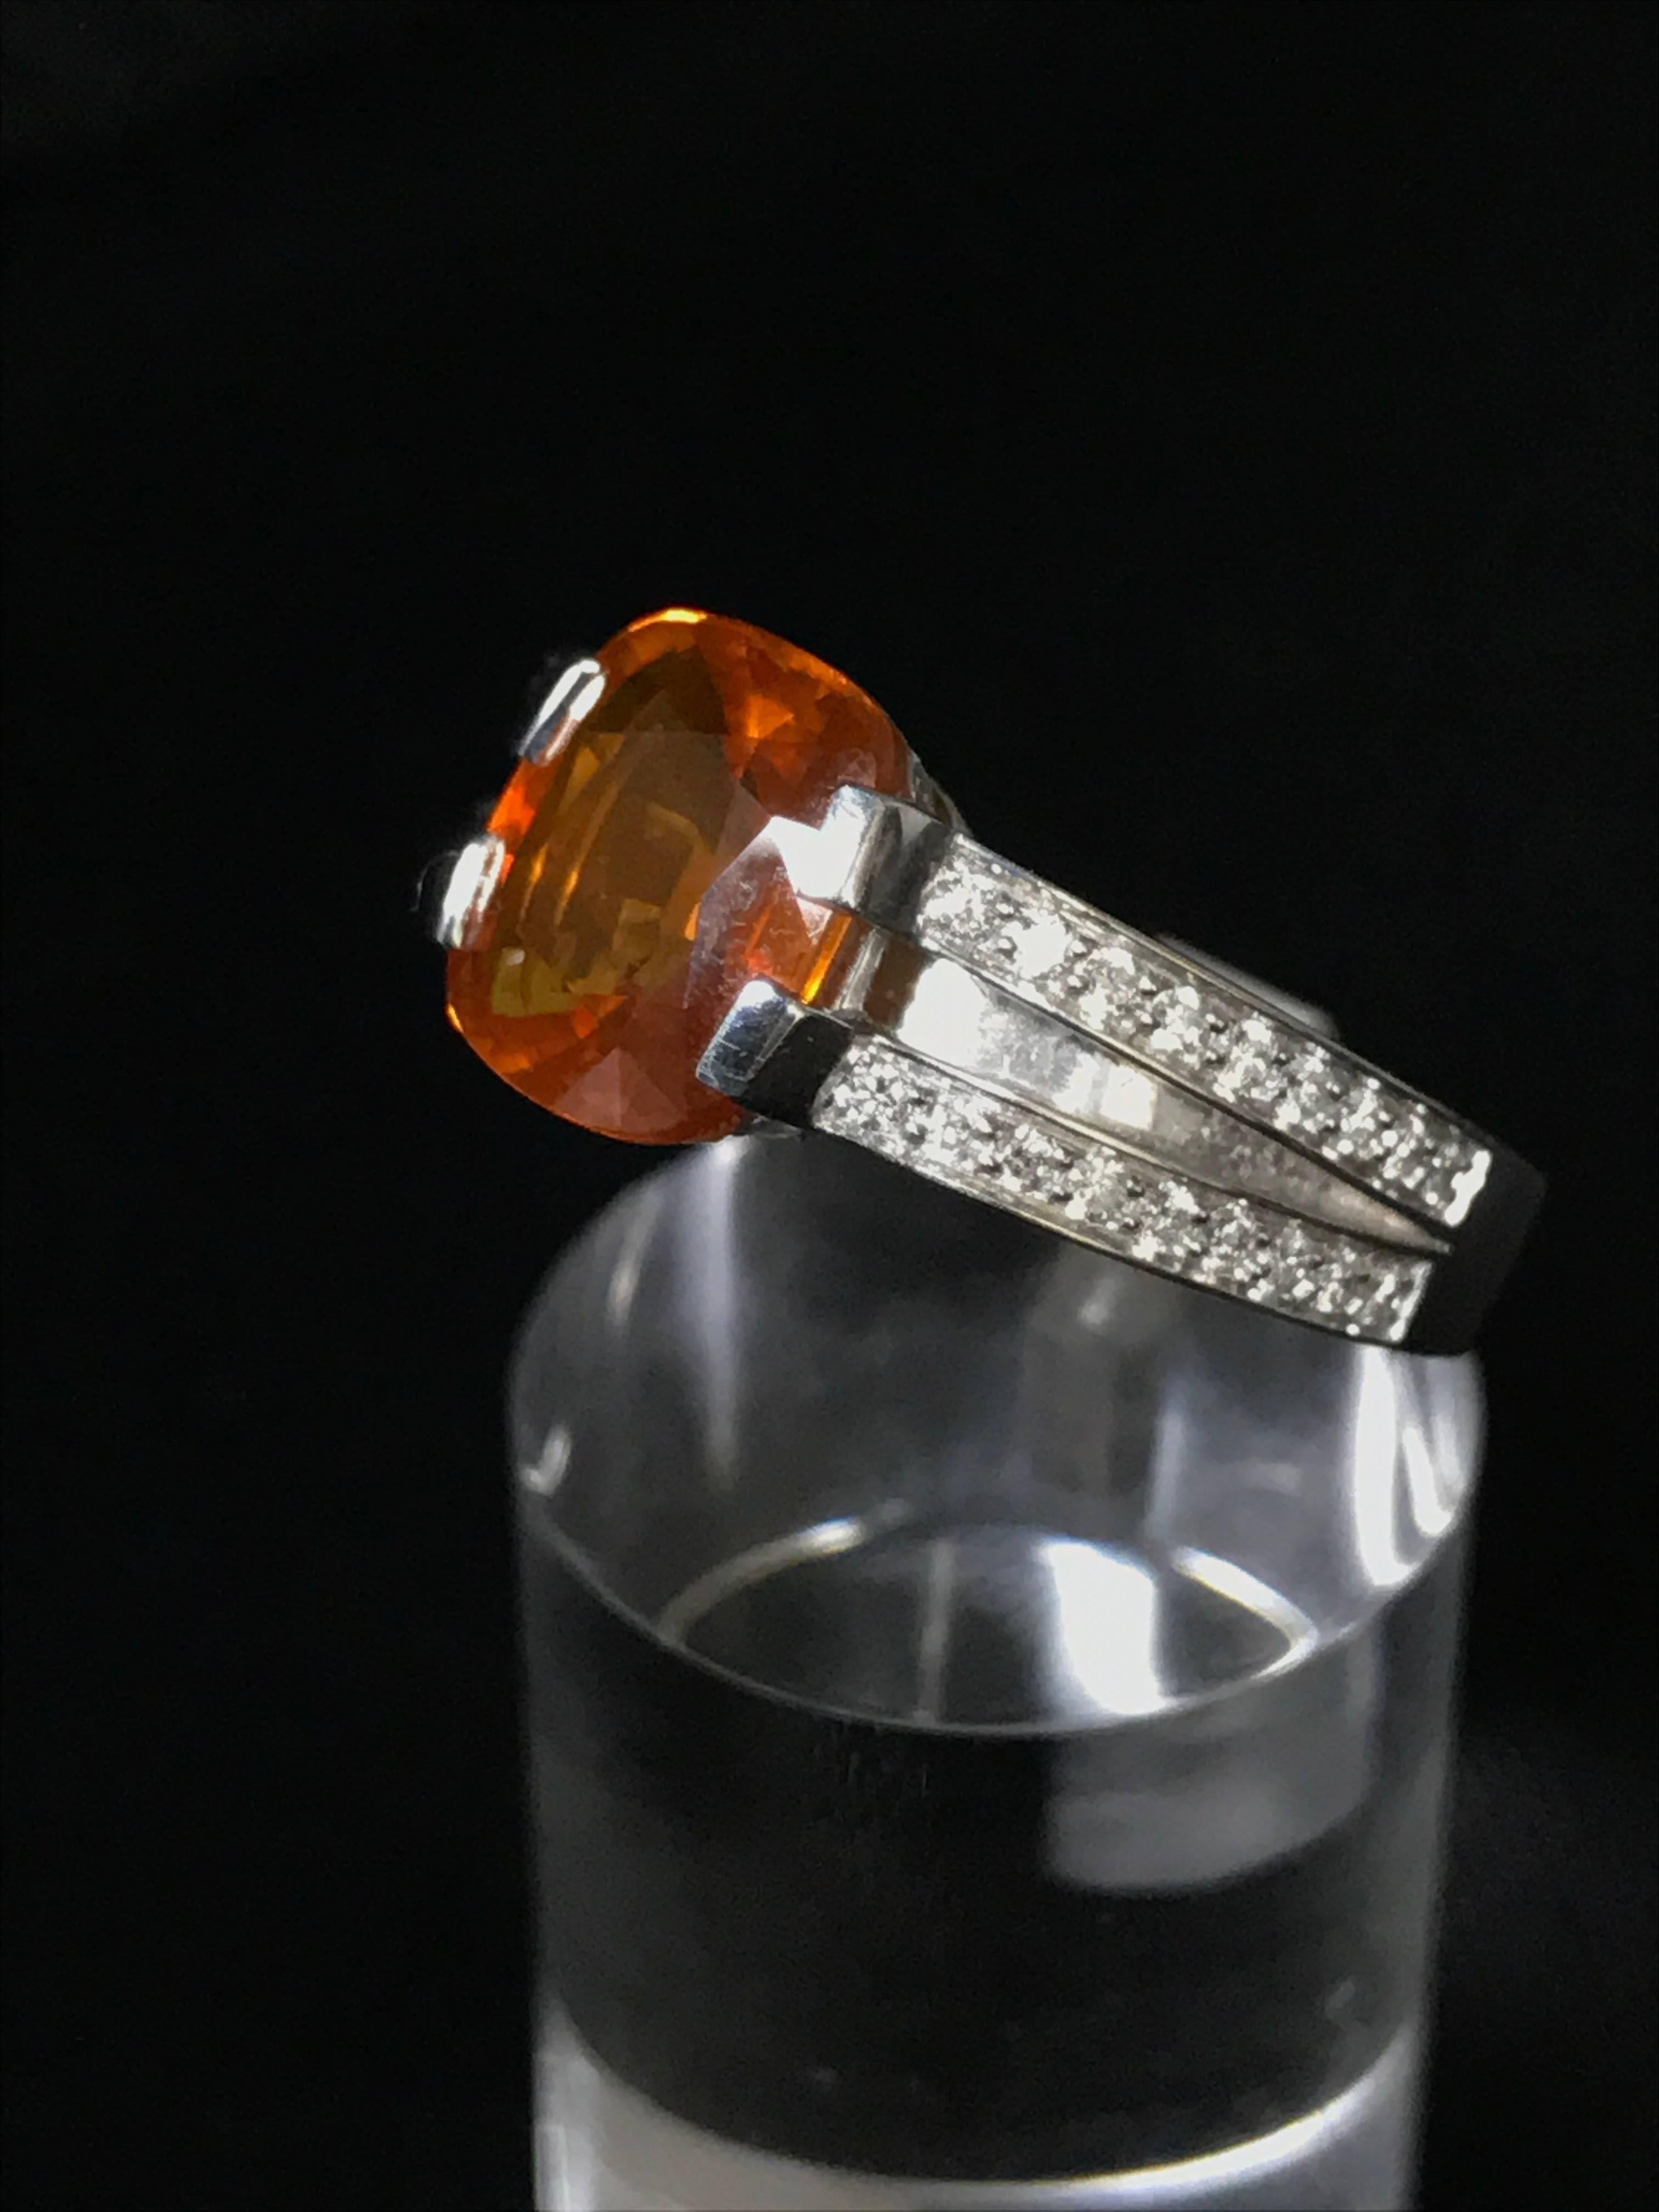 Cushion Cut Orange Sapphire Diamonds and White Gold Ring with a Certificate.